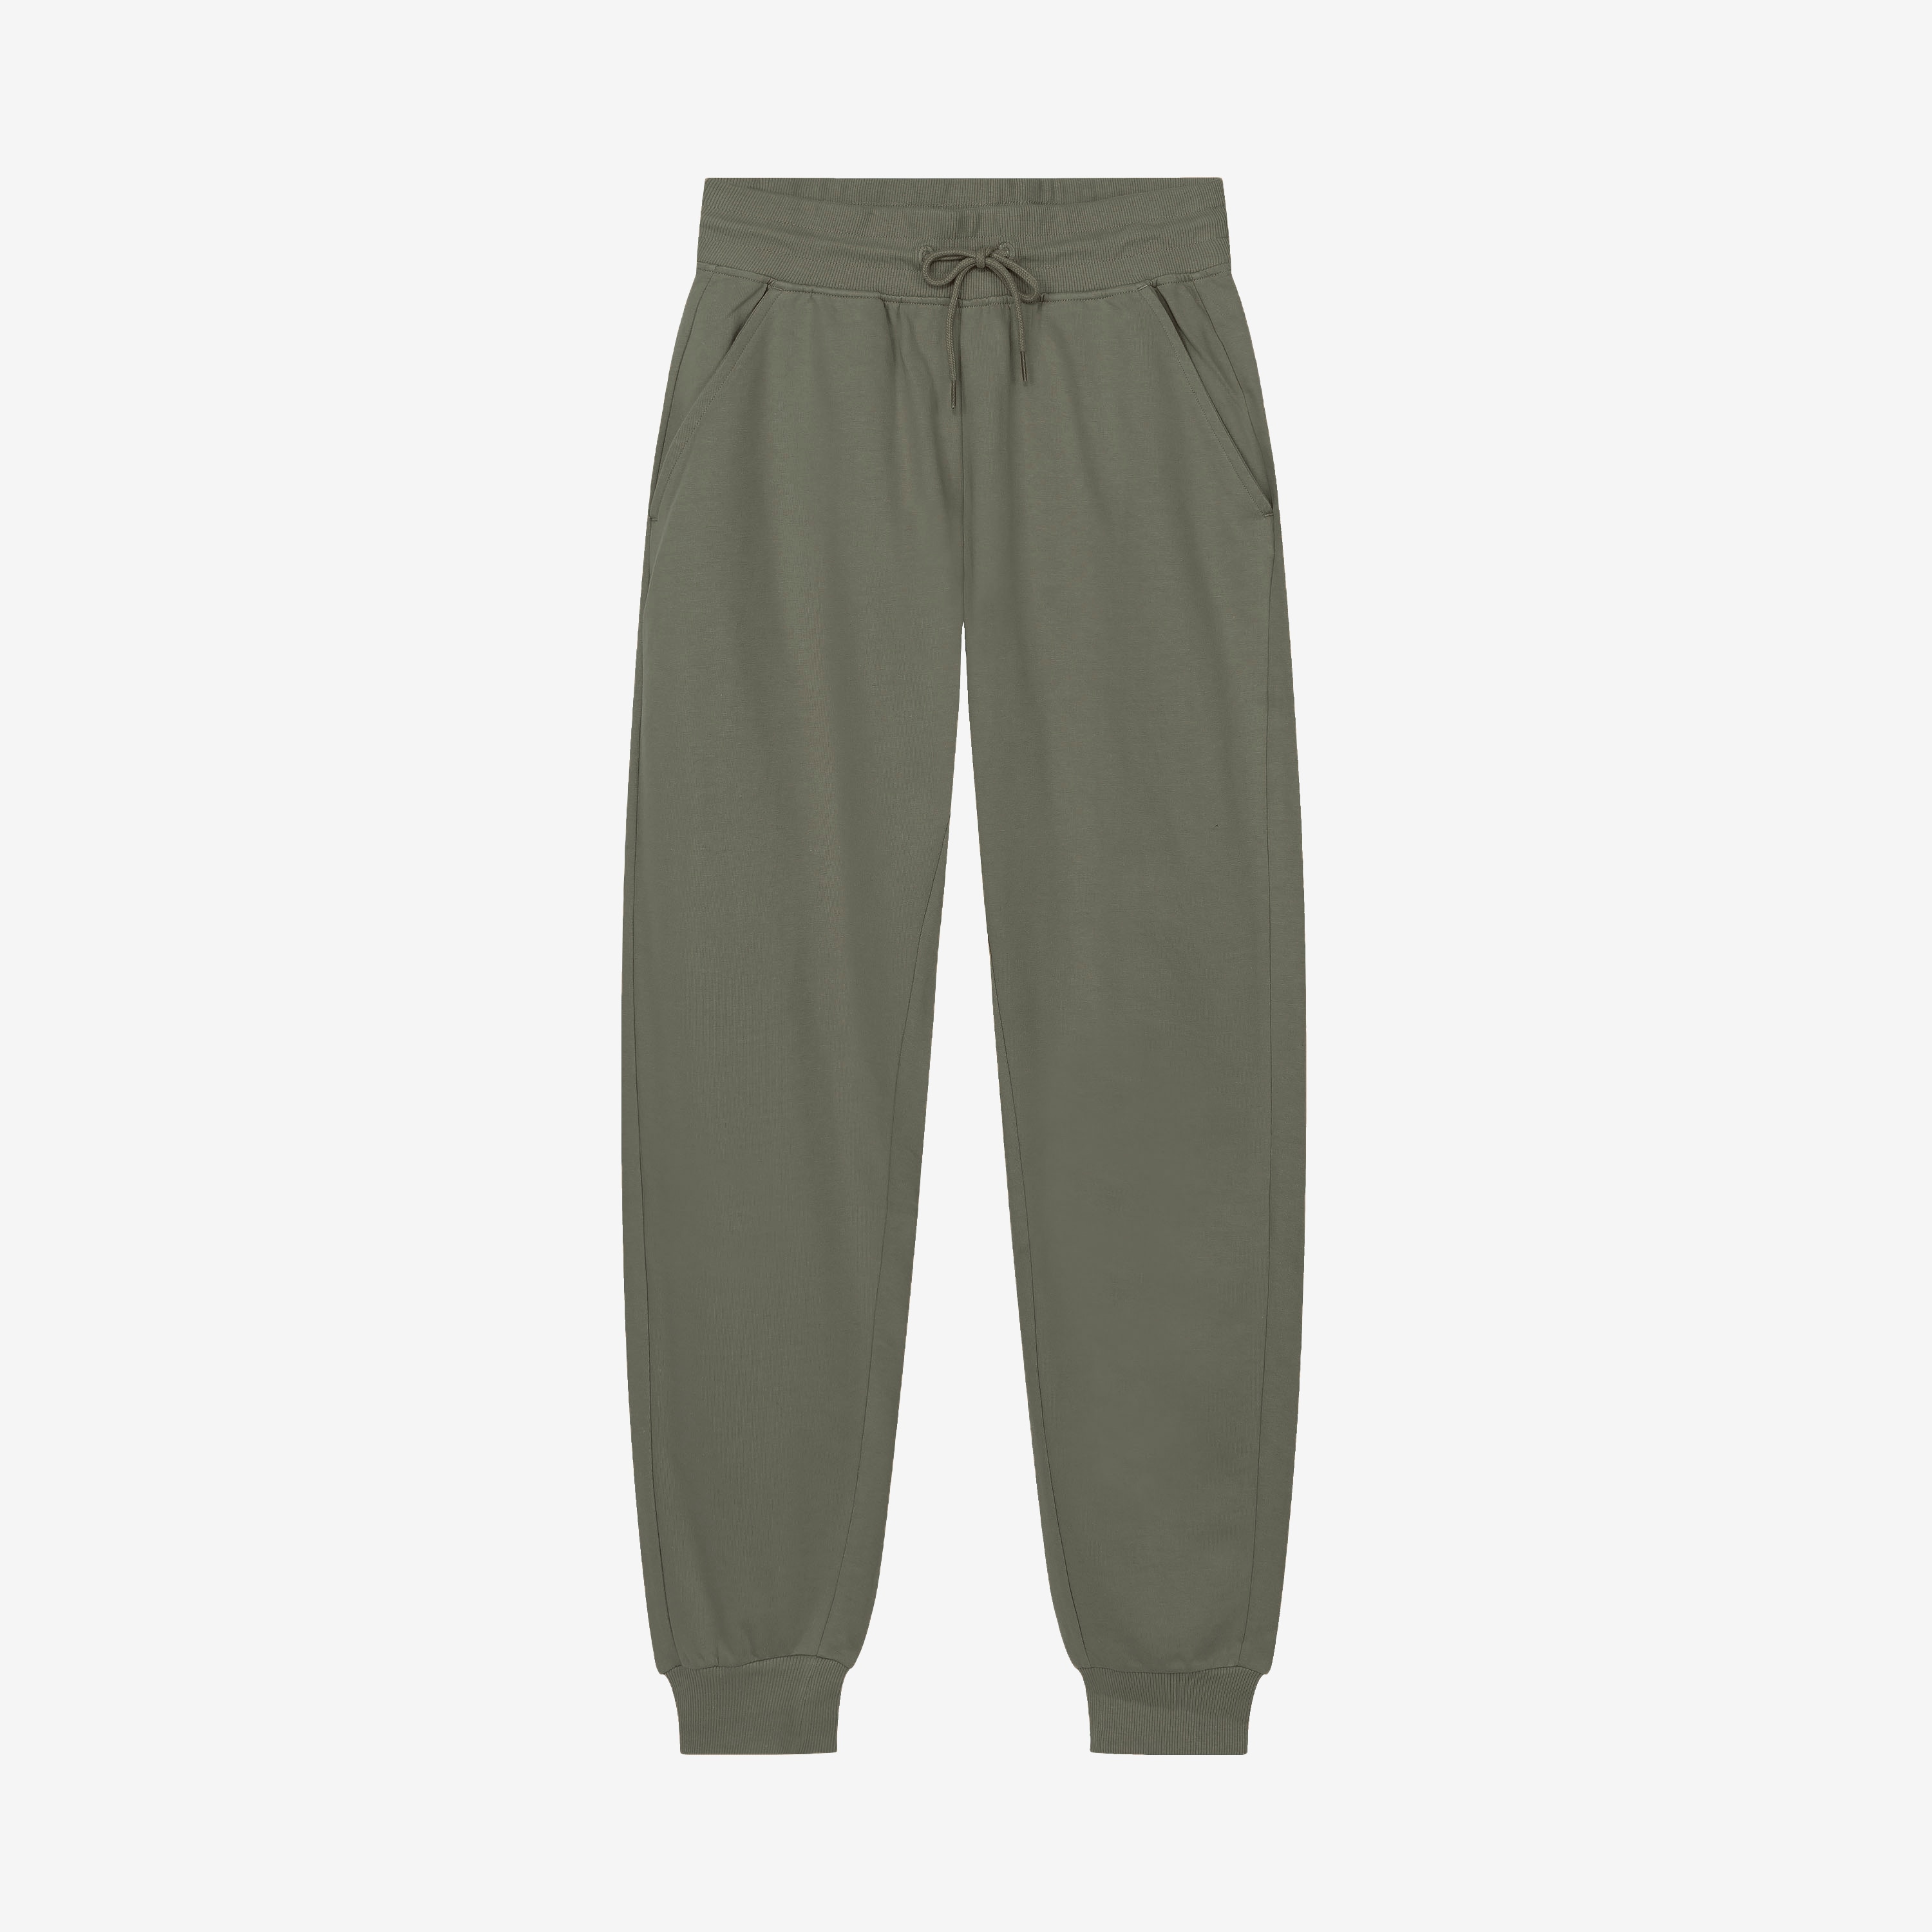 637-40_Lounge-Pant_olive-green_CO-A